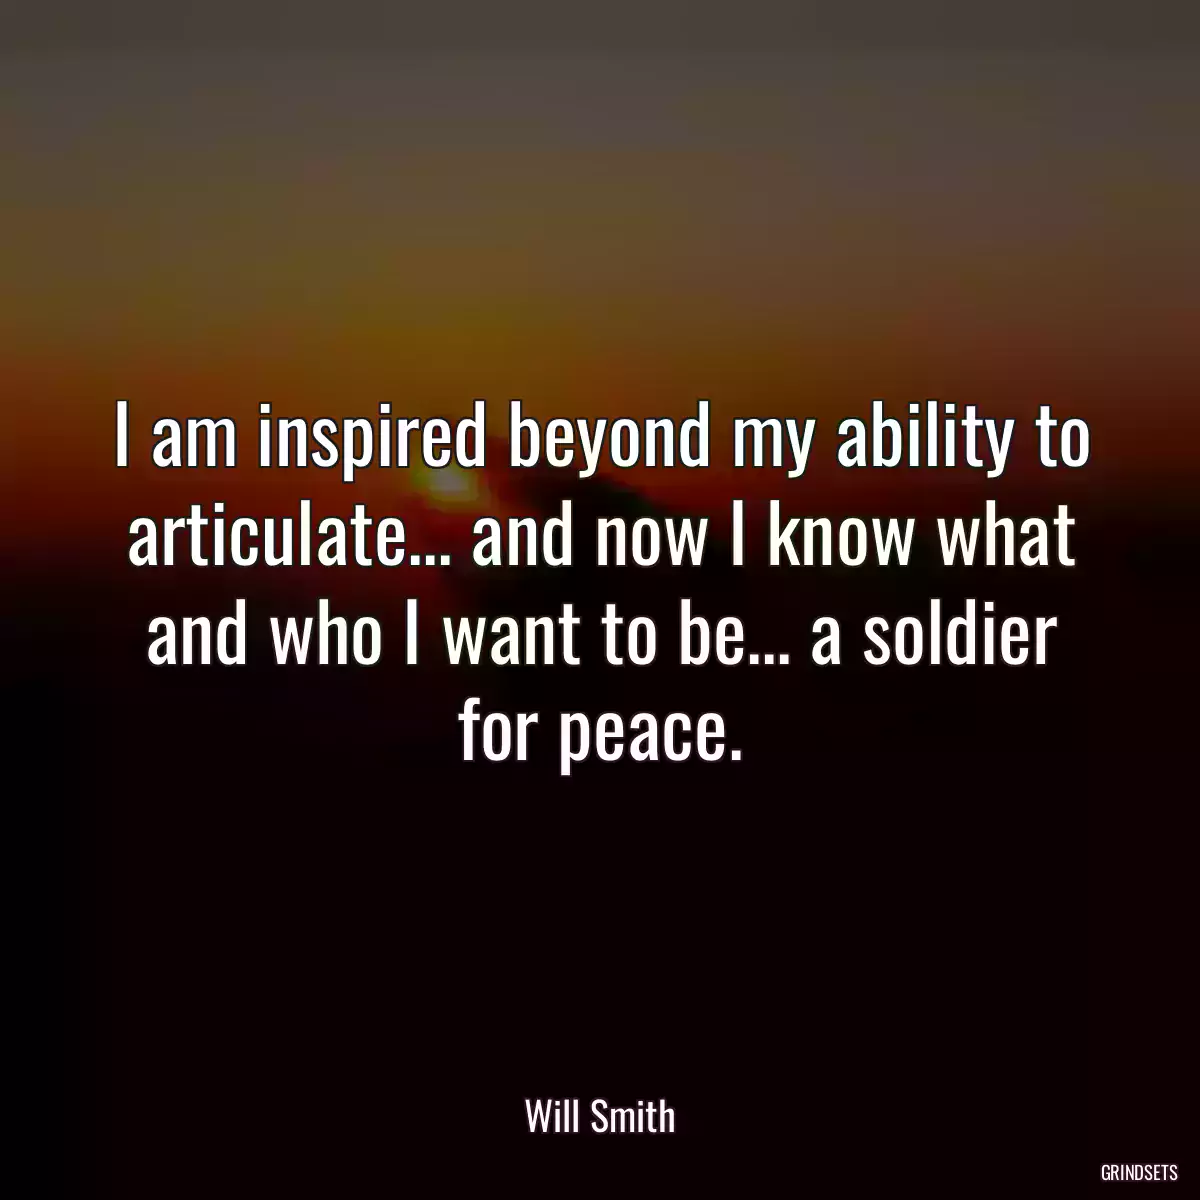 I am inspired beyond my ability to articulate... and now I know what and who I want to be... a soldier for peace.